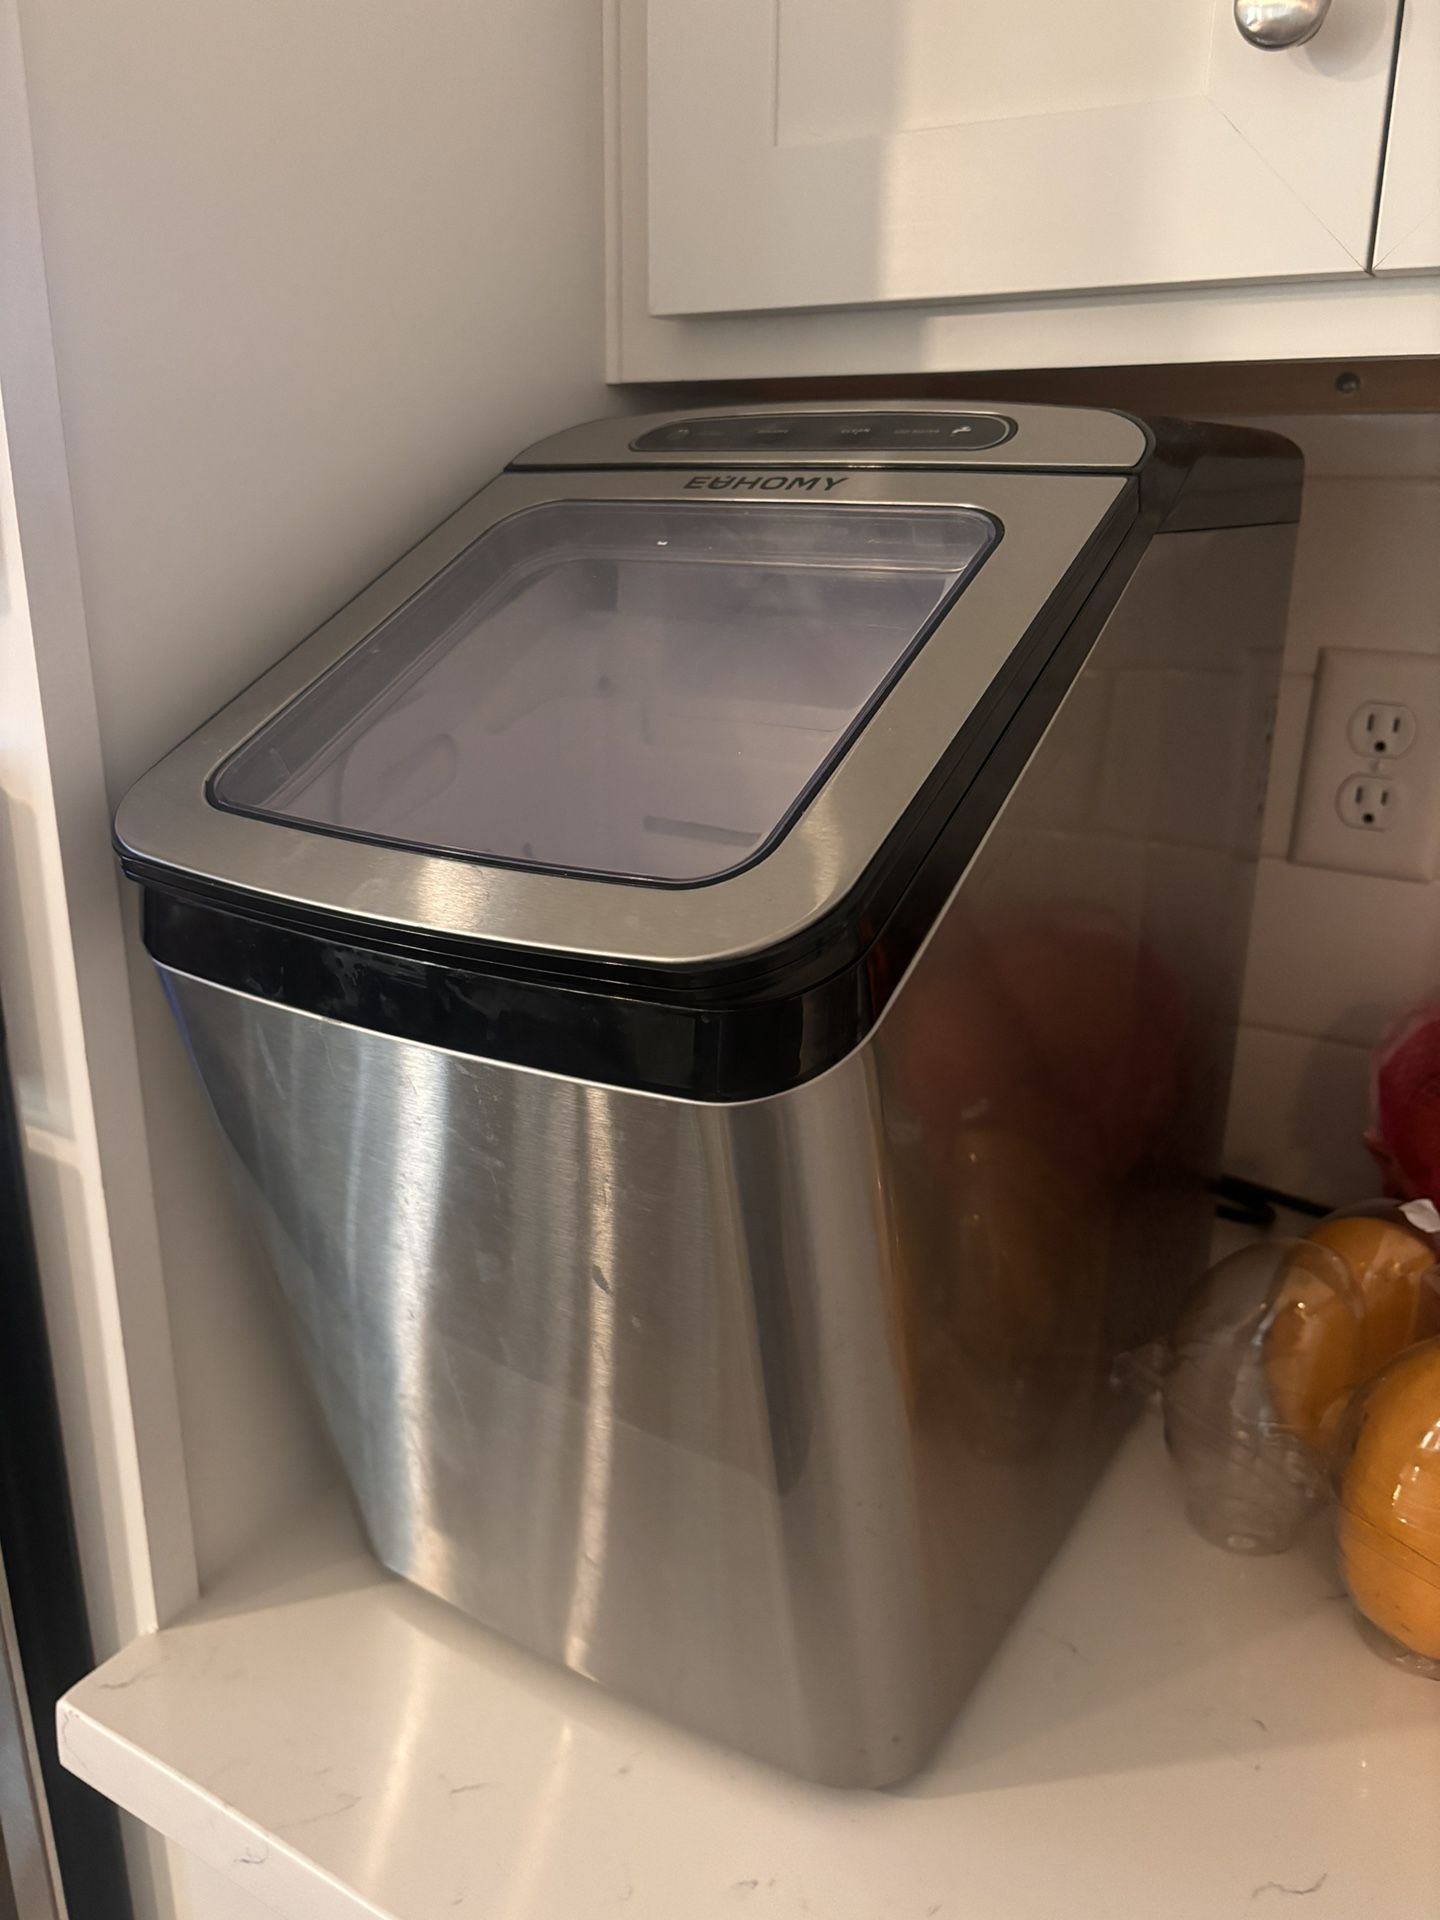 Nugget ice maker